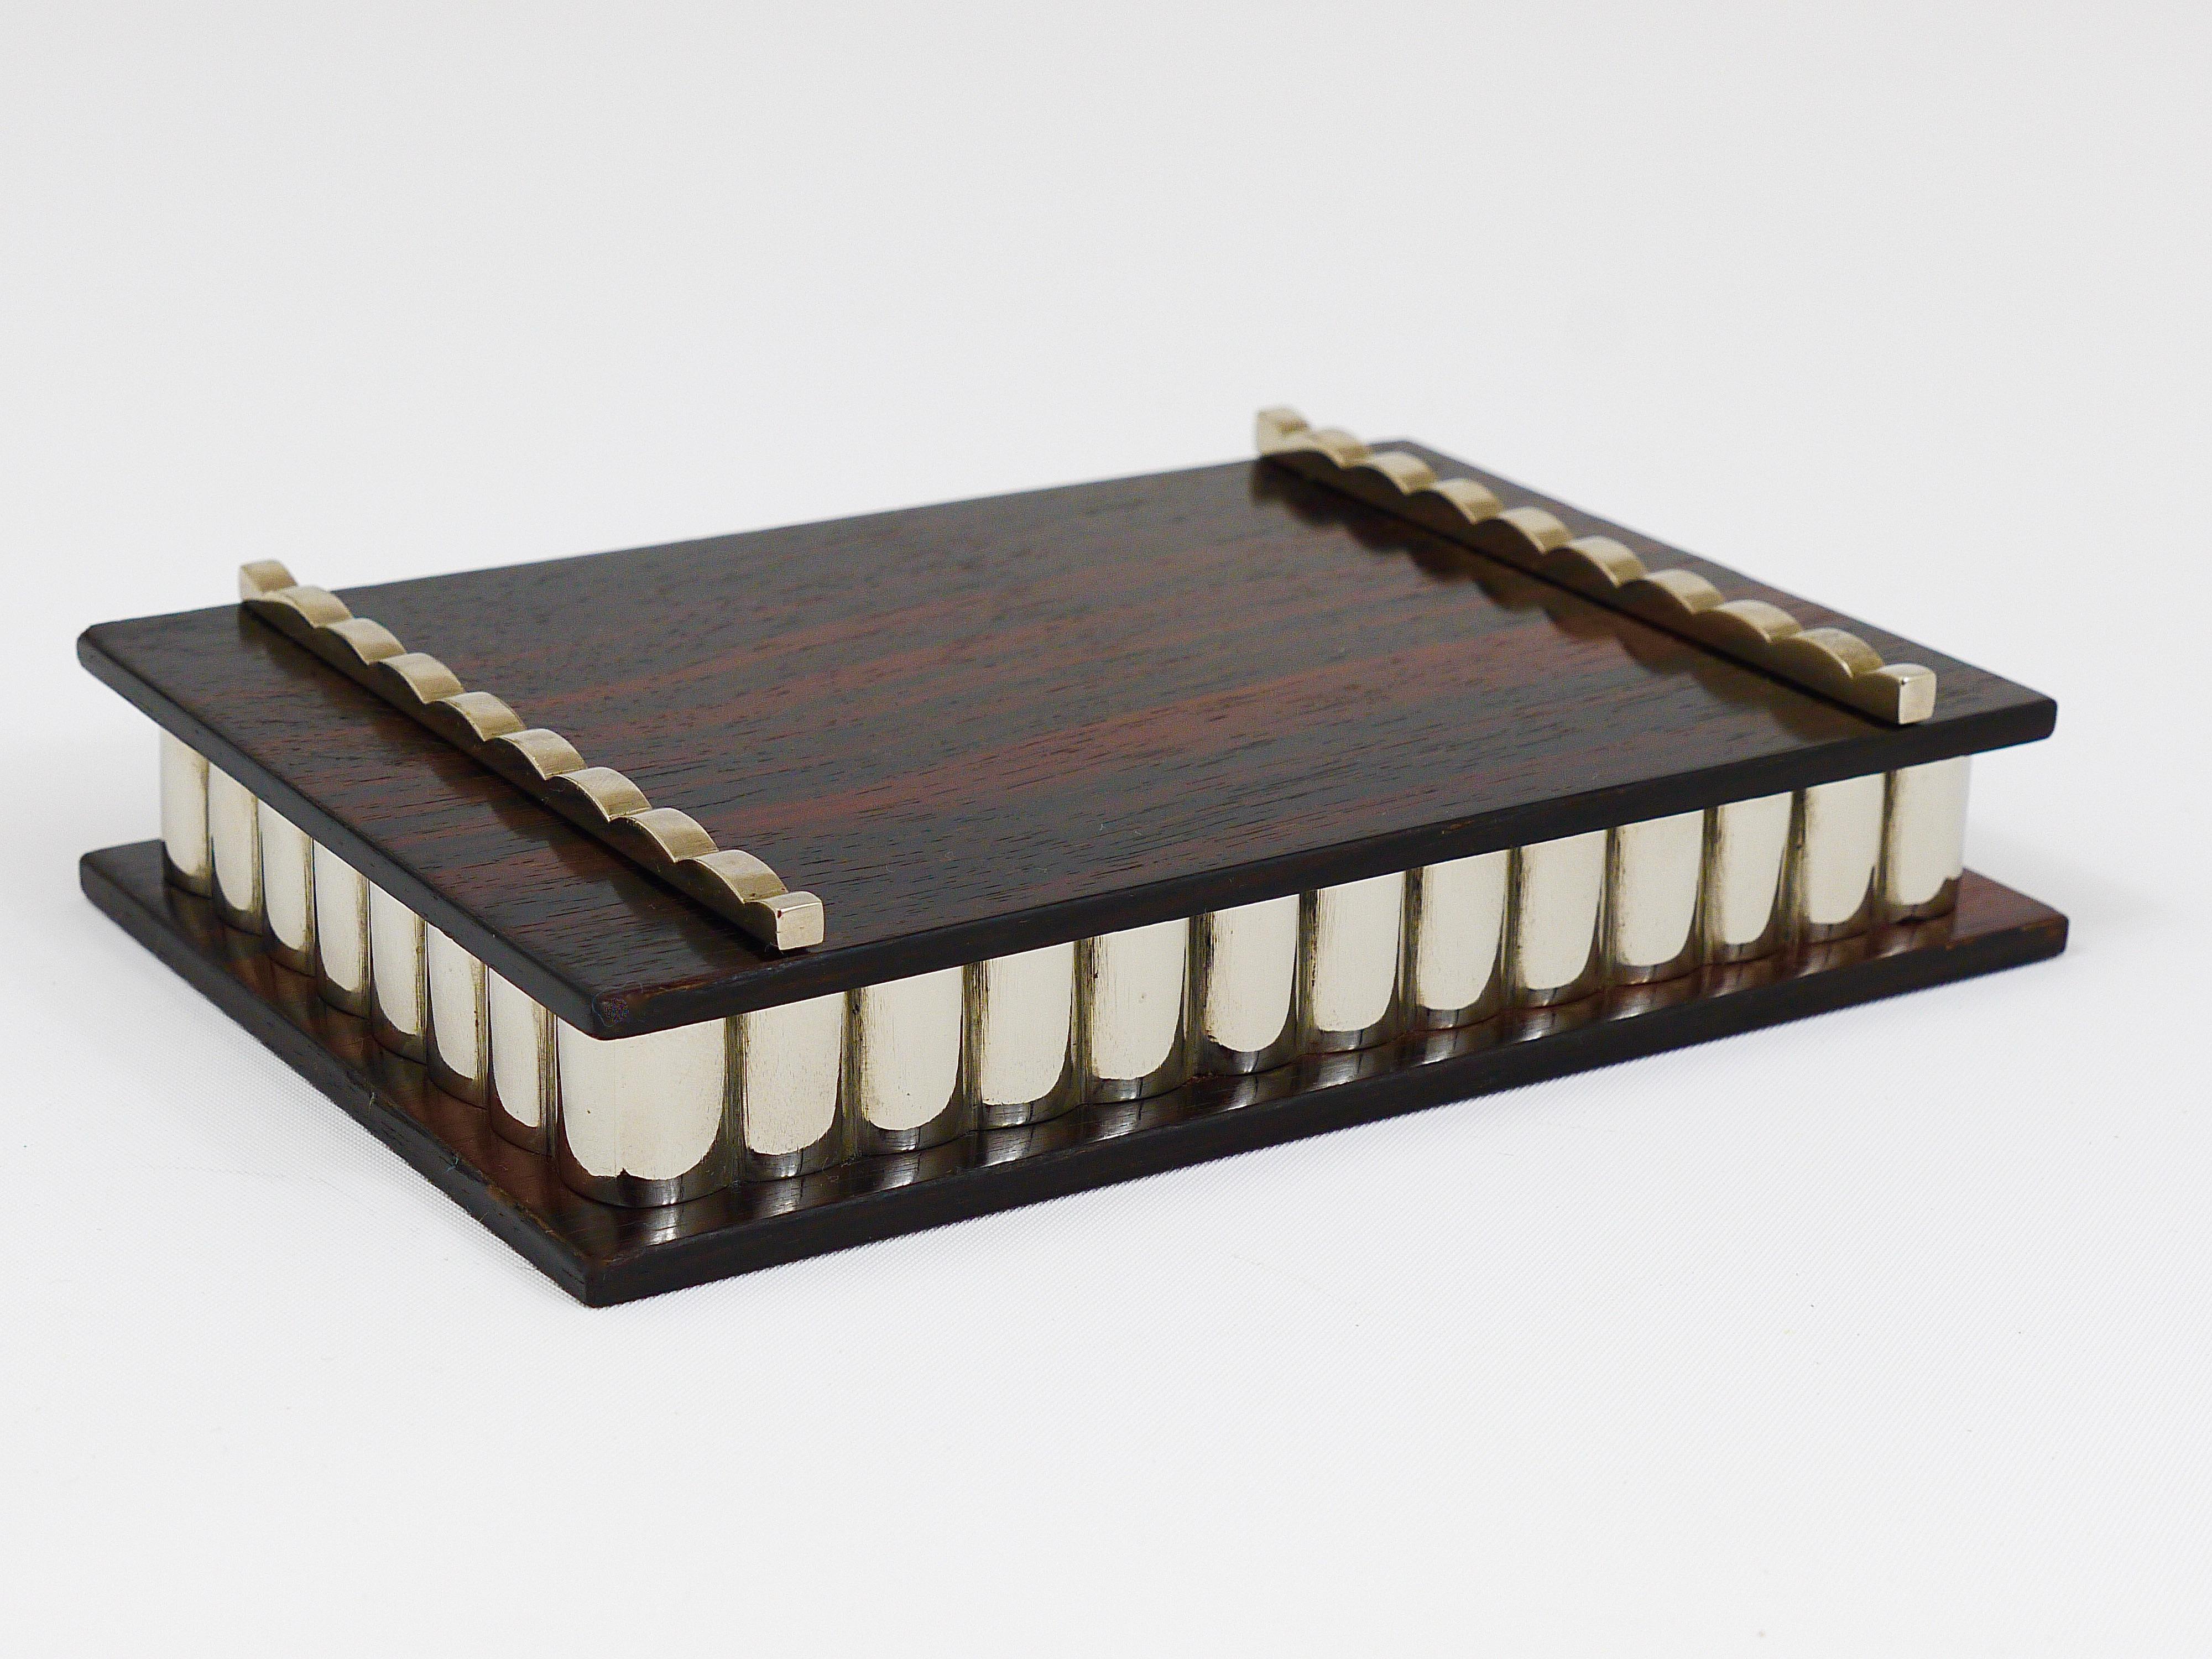 A beautiful Art Deco storage / jewelry or cigarette box, dated circa 1930s. Handmade in Vienna / Austria of macassar / ebony wood, with beautiful nickel-plated metal details. In excellent condition.